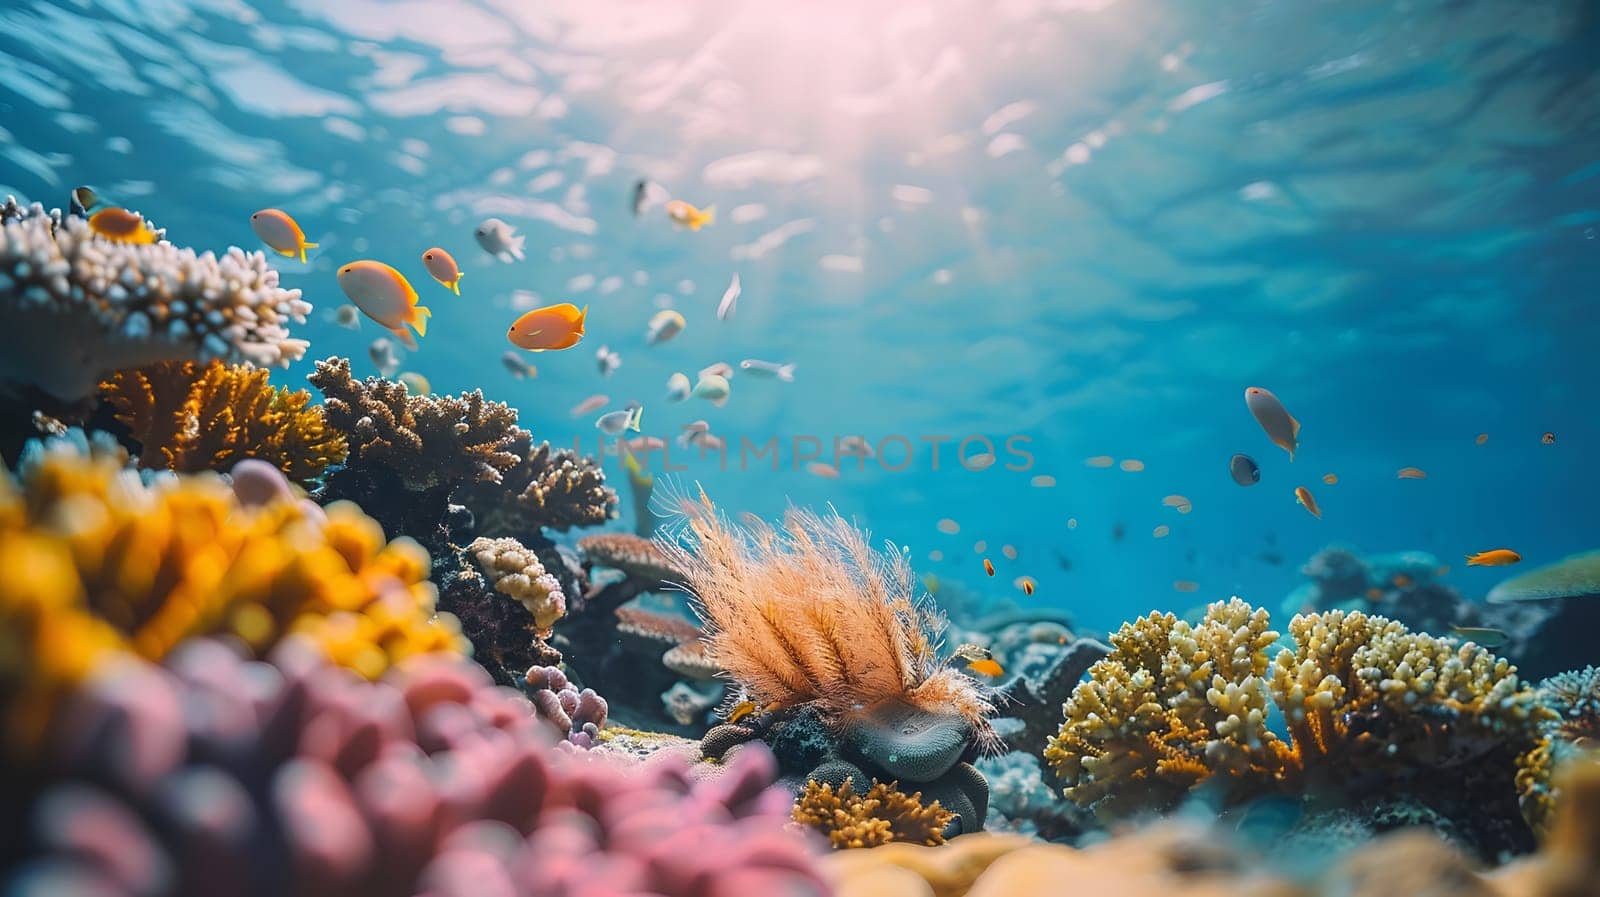 Vibrant coral reef teeming with fish and corals in the underwater world by Nadtochiy